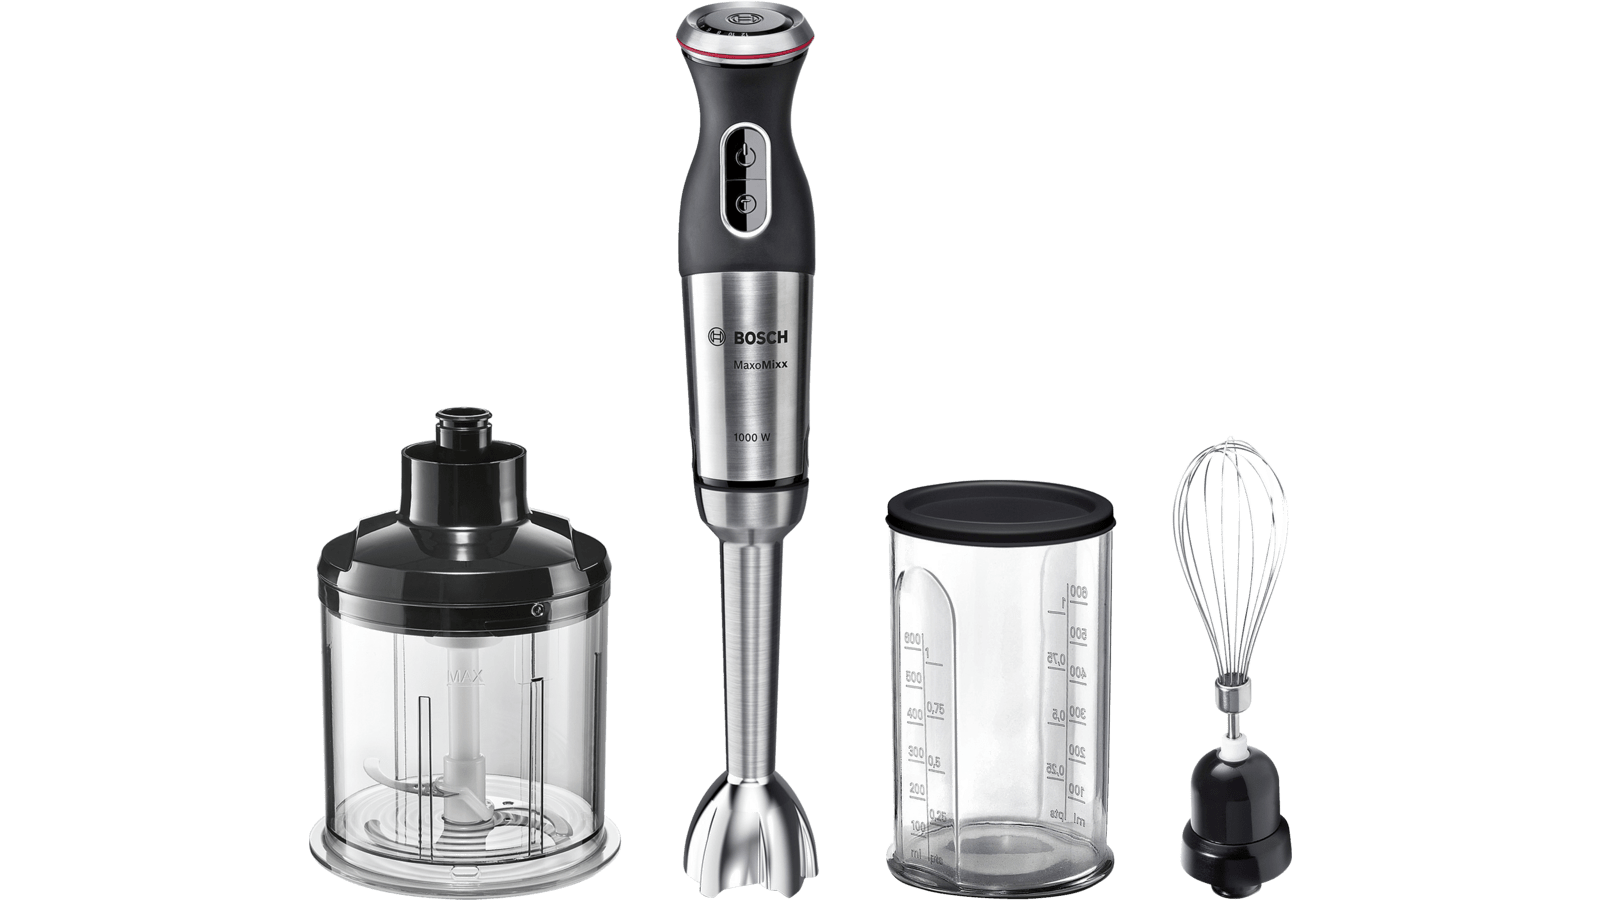 Bosch Hand Held Blender Spare Parts | Reviewmotors.co